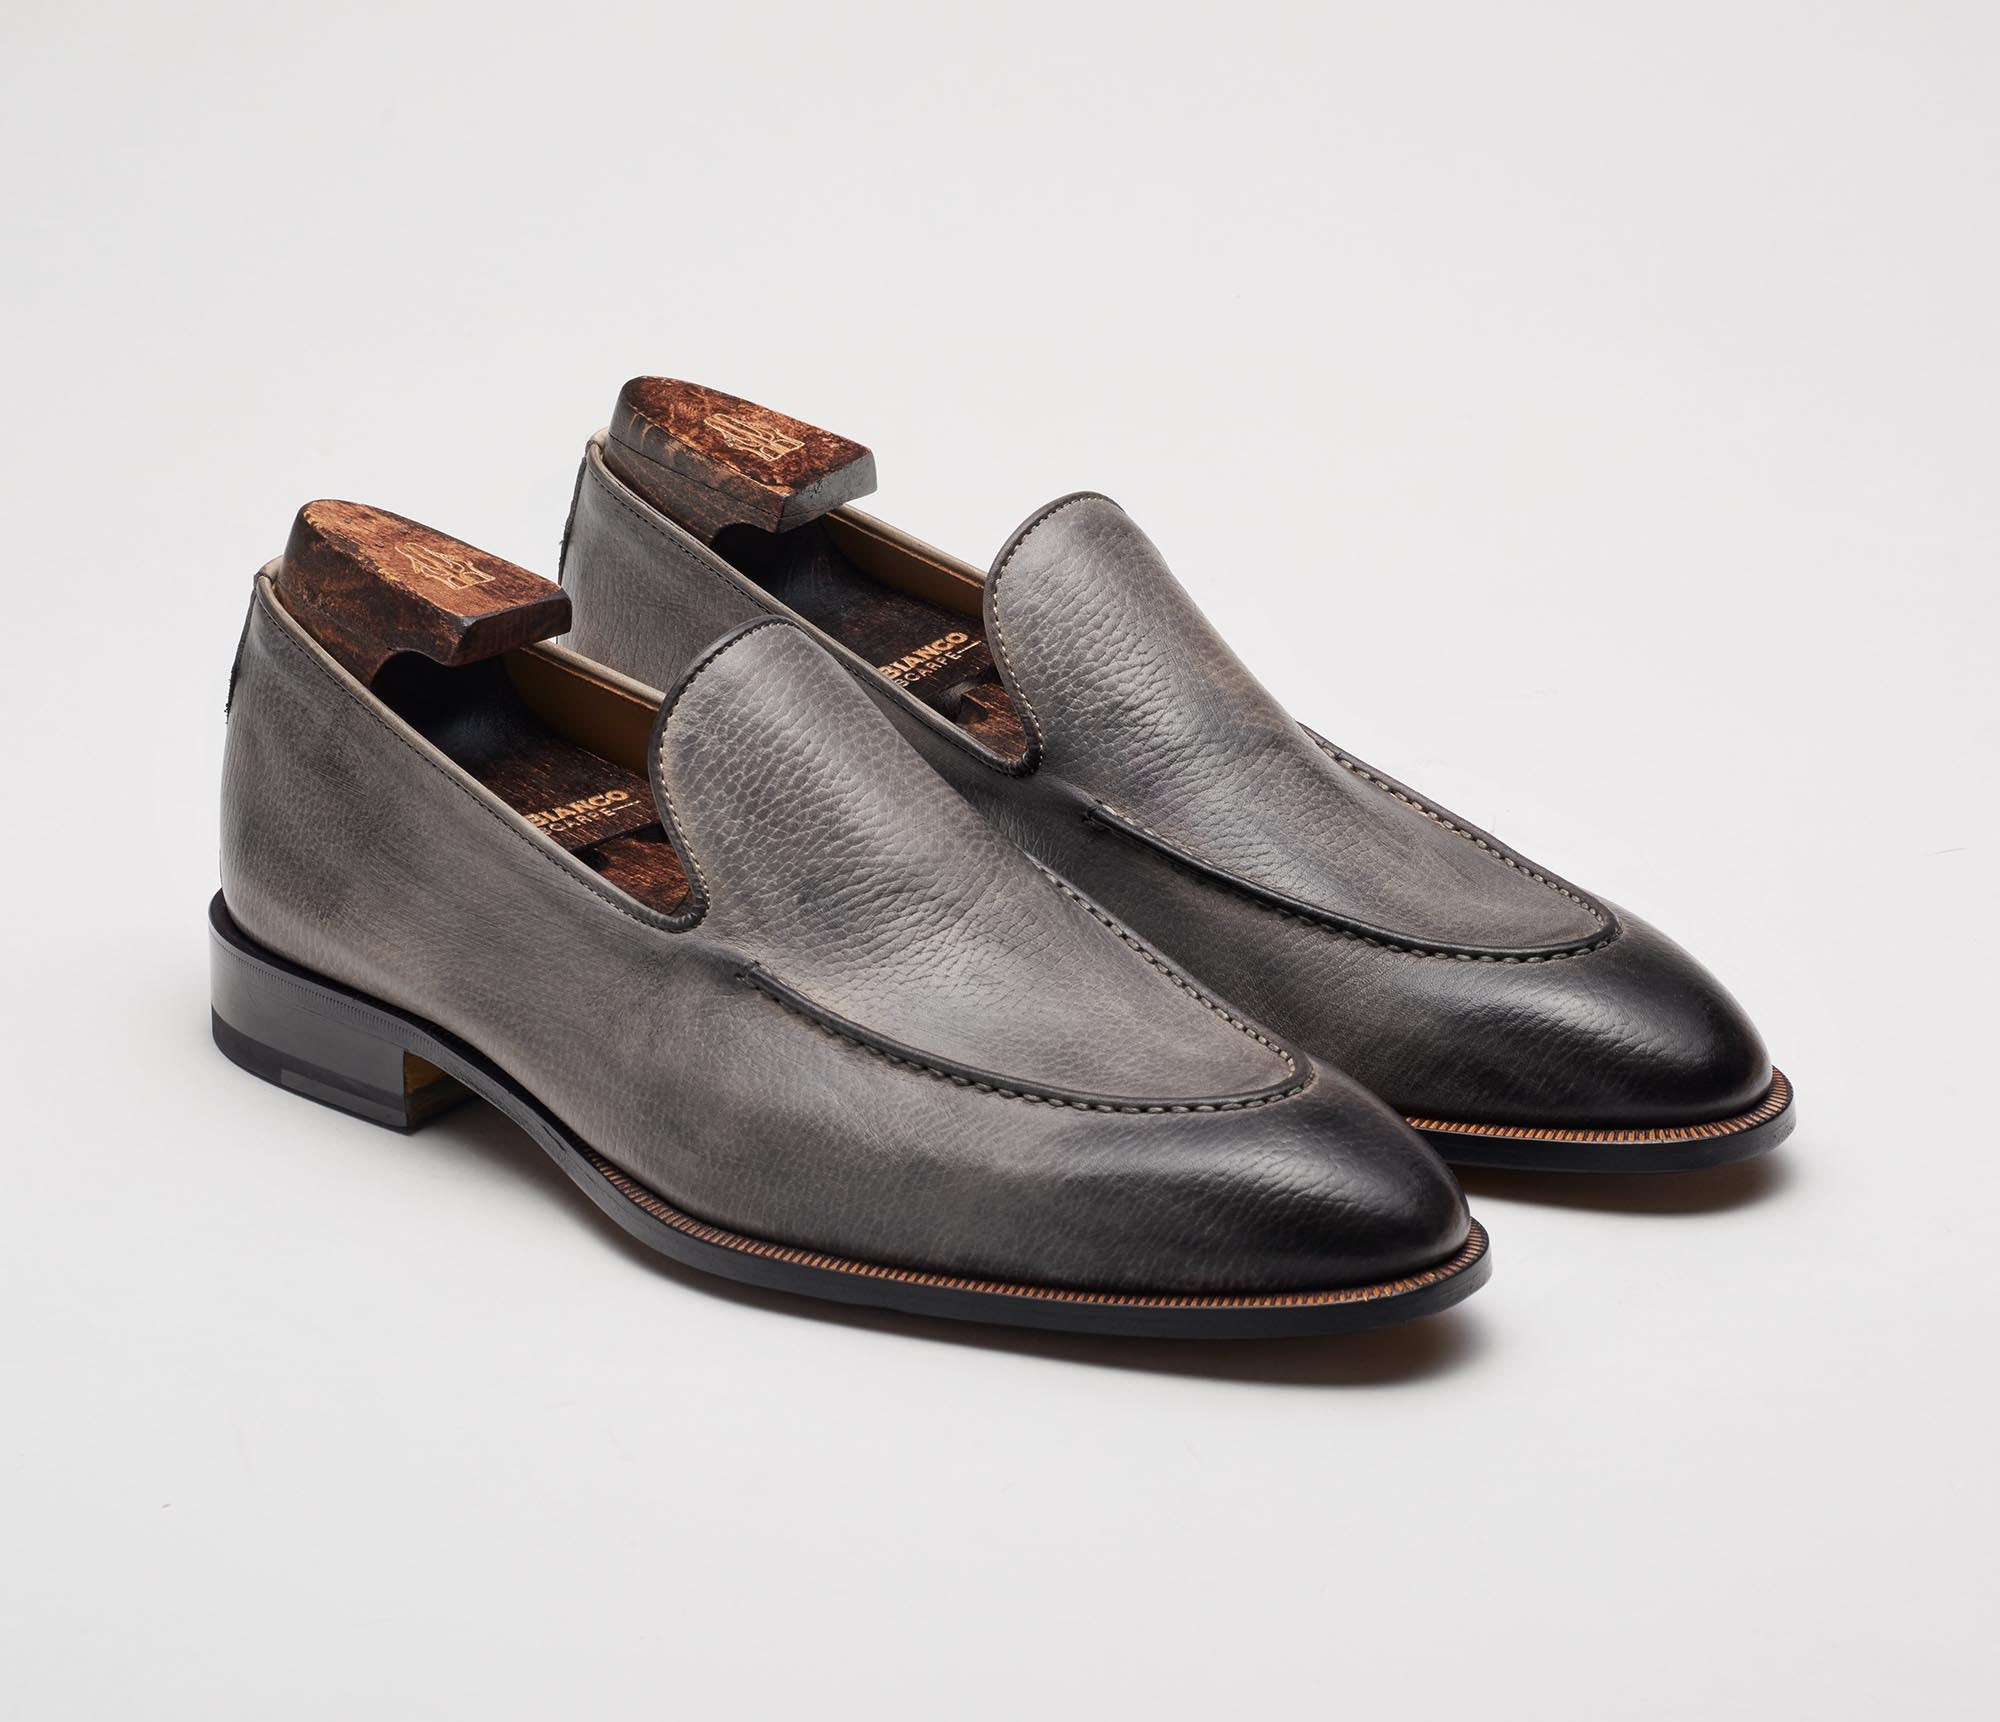 Istria Fumo Loafer